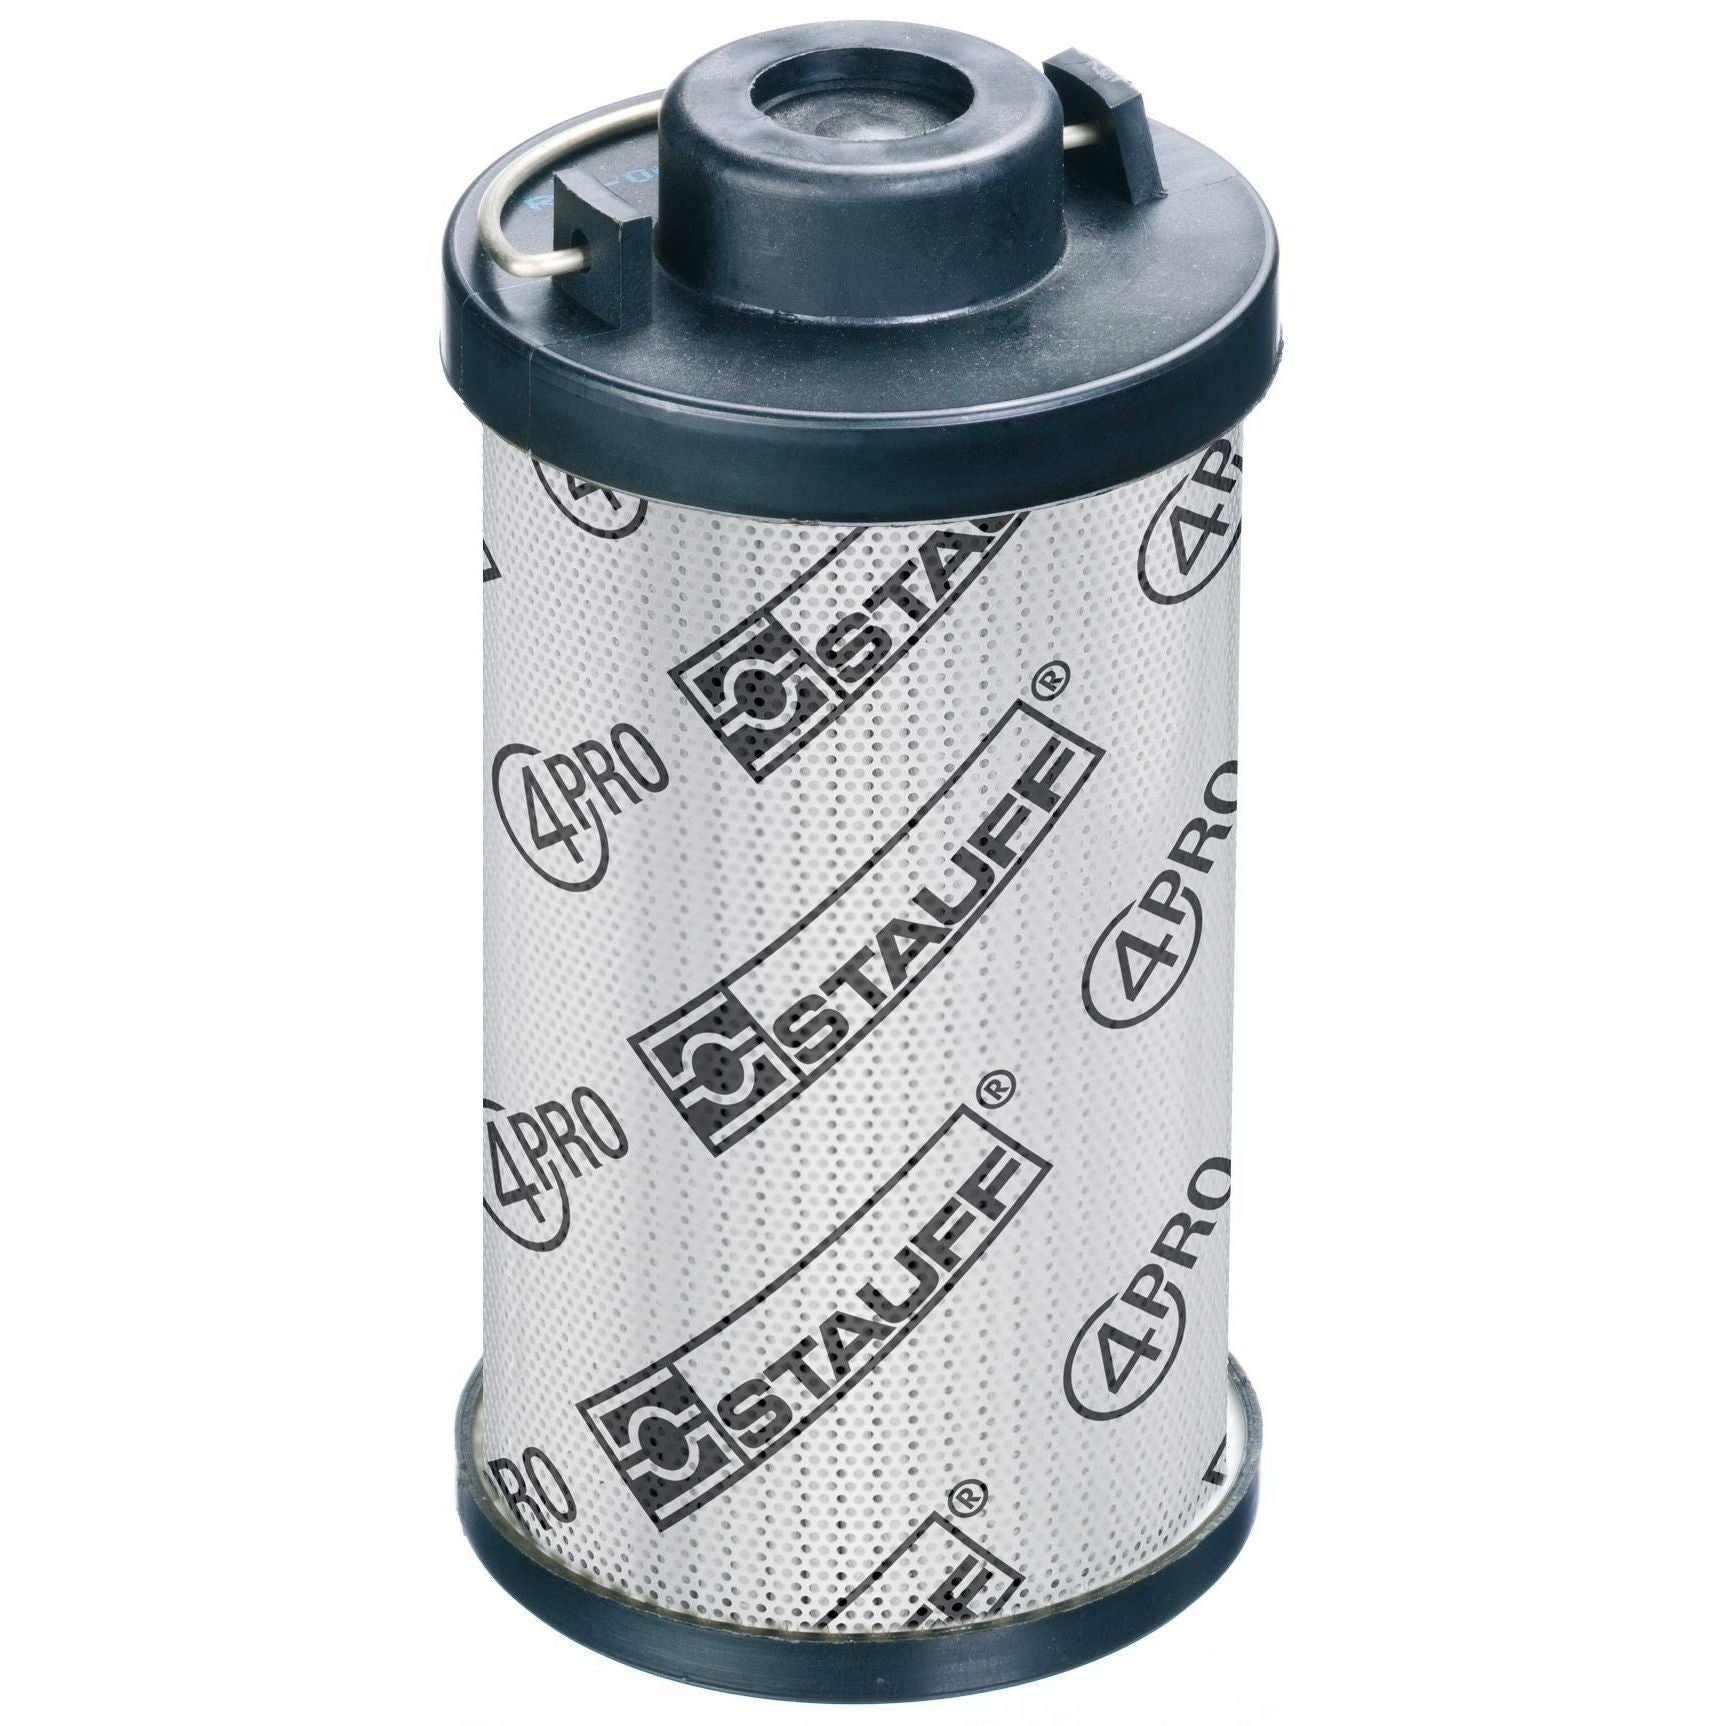 RE-045-A-10-B-B3/3 : Stauff RF-045 Series Filter Element, 10 Micron, Stainless Fiber Media, 435psi Collapse Differential, Buna